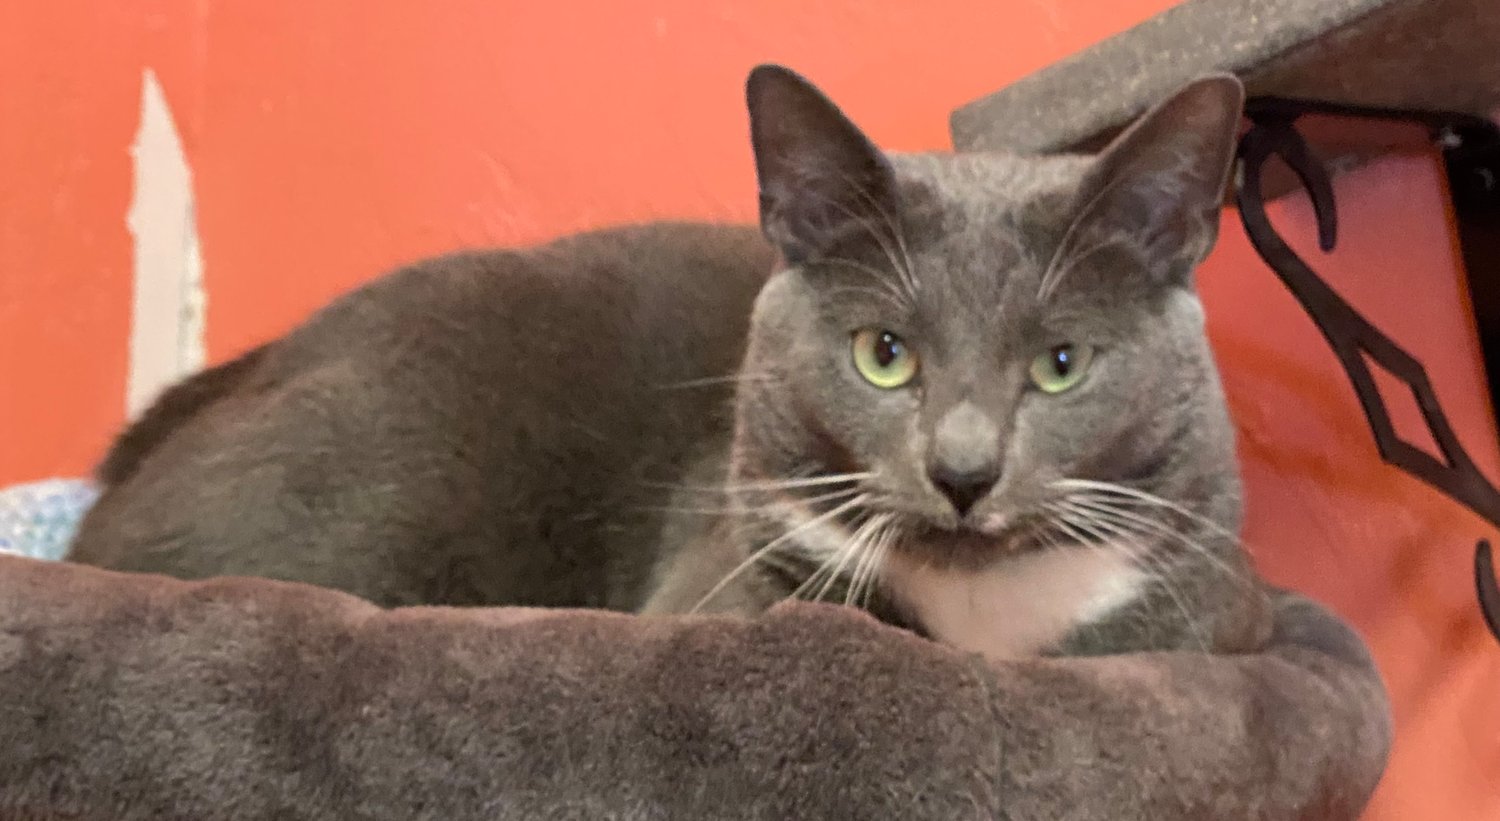 Heather is a shy, sweet kitty that needs a loving home.